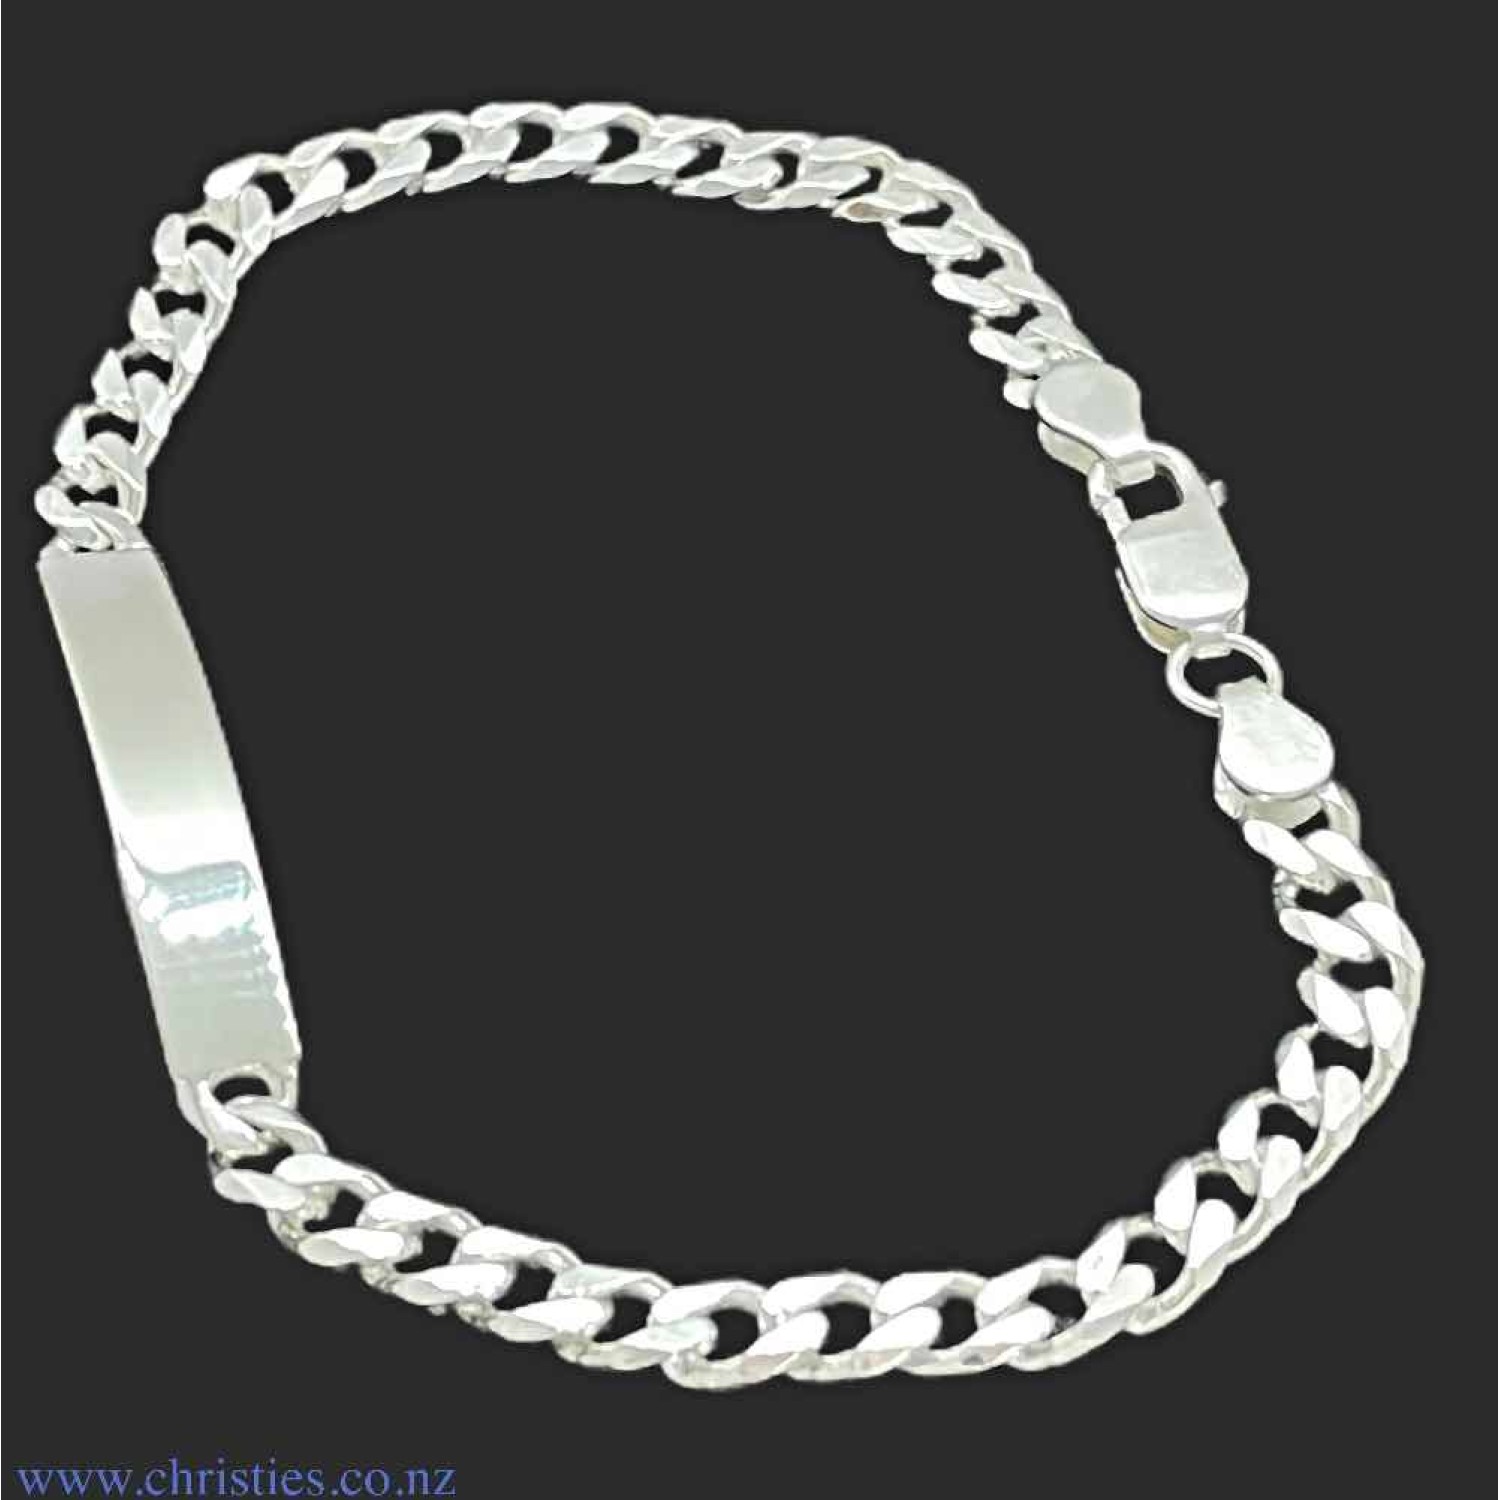 IDCD150H6C21 Sterling Silver ID Curb Link Bracelet. Lightweight  Identification bracelet crafted in 925 sterling silver  Afterpay - Split your purchase into 4 instalments - Pay for your purchase over 4 instalments, due every two weeks. You’ll pay y @chris